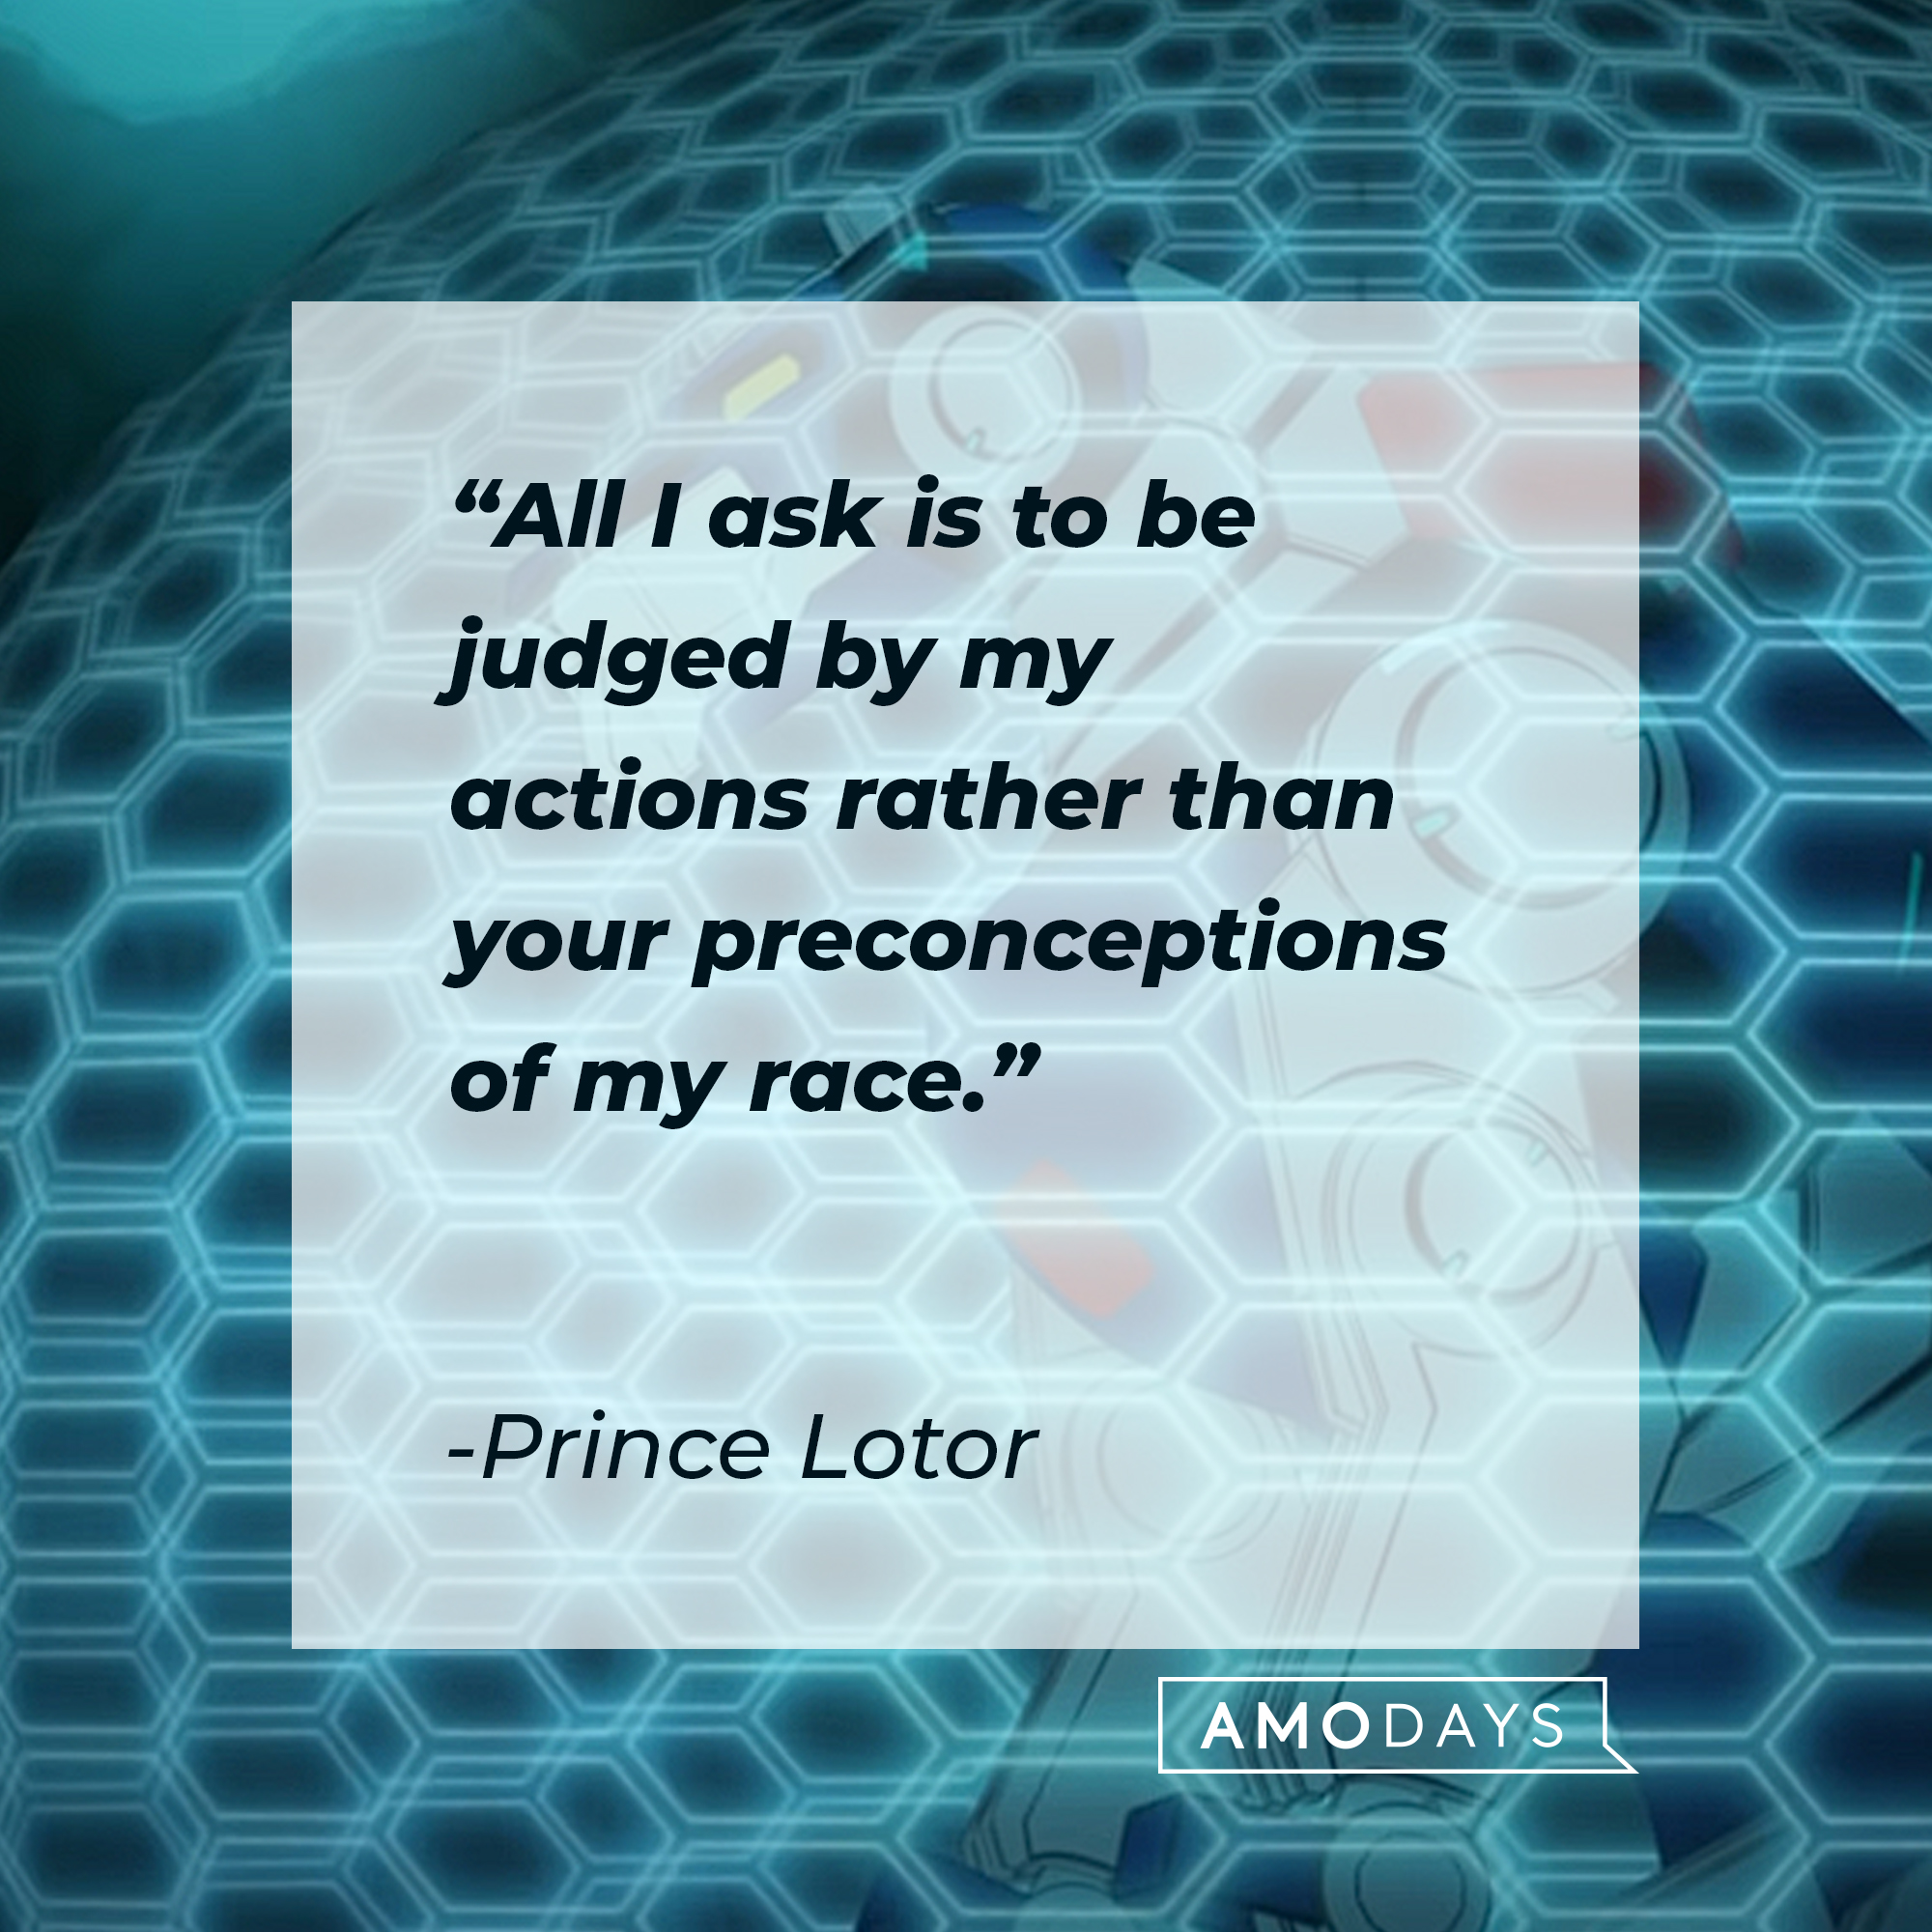 Prince Lotor's quote: "All I ask is to be judged by my actions rather than your preconceptions of my race." | Source: youtube.com/netflixafterschool